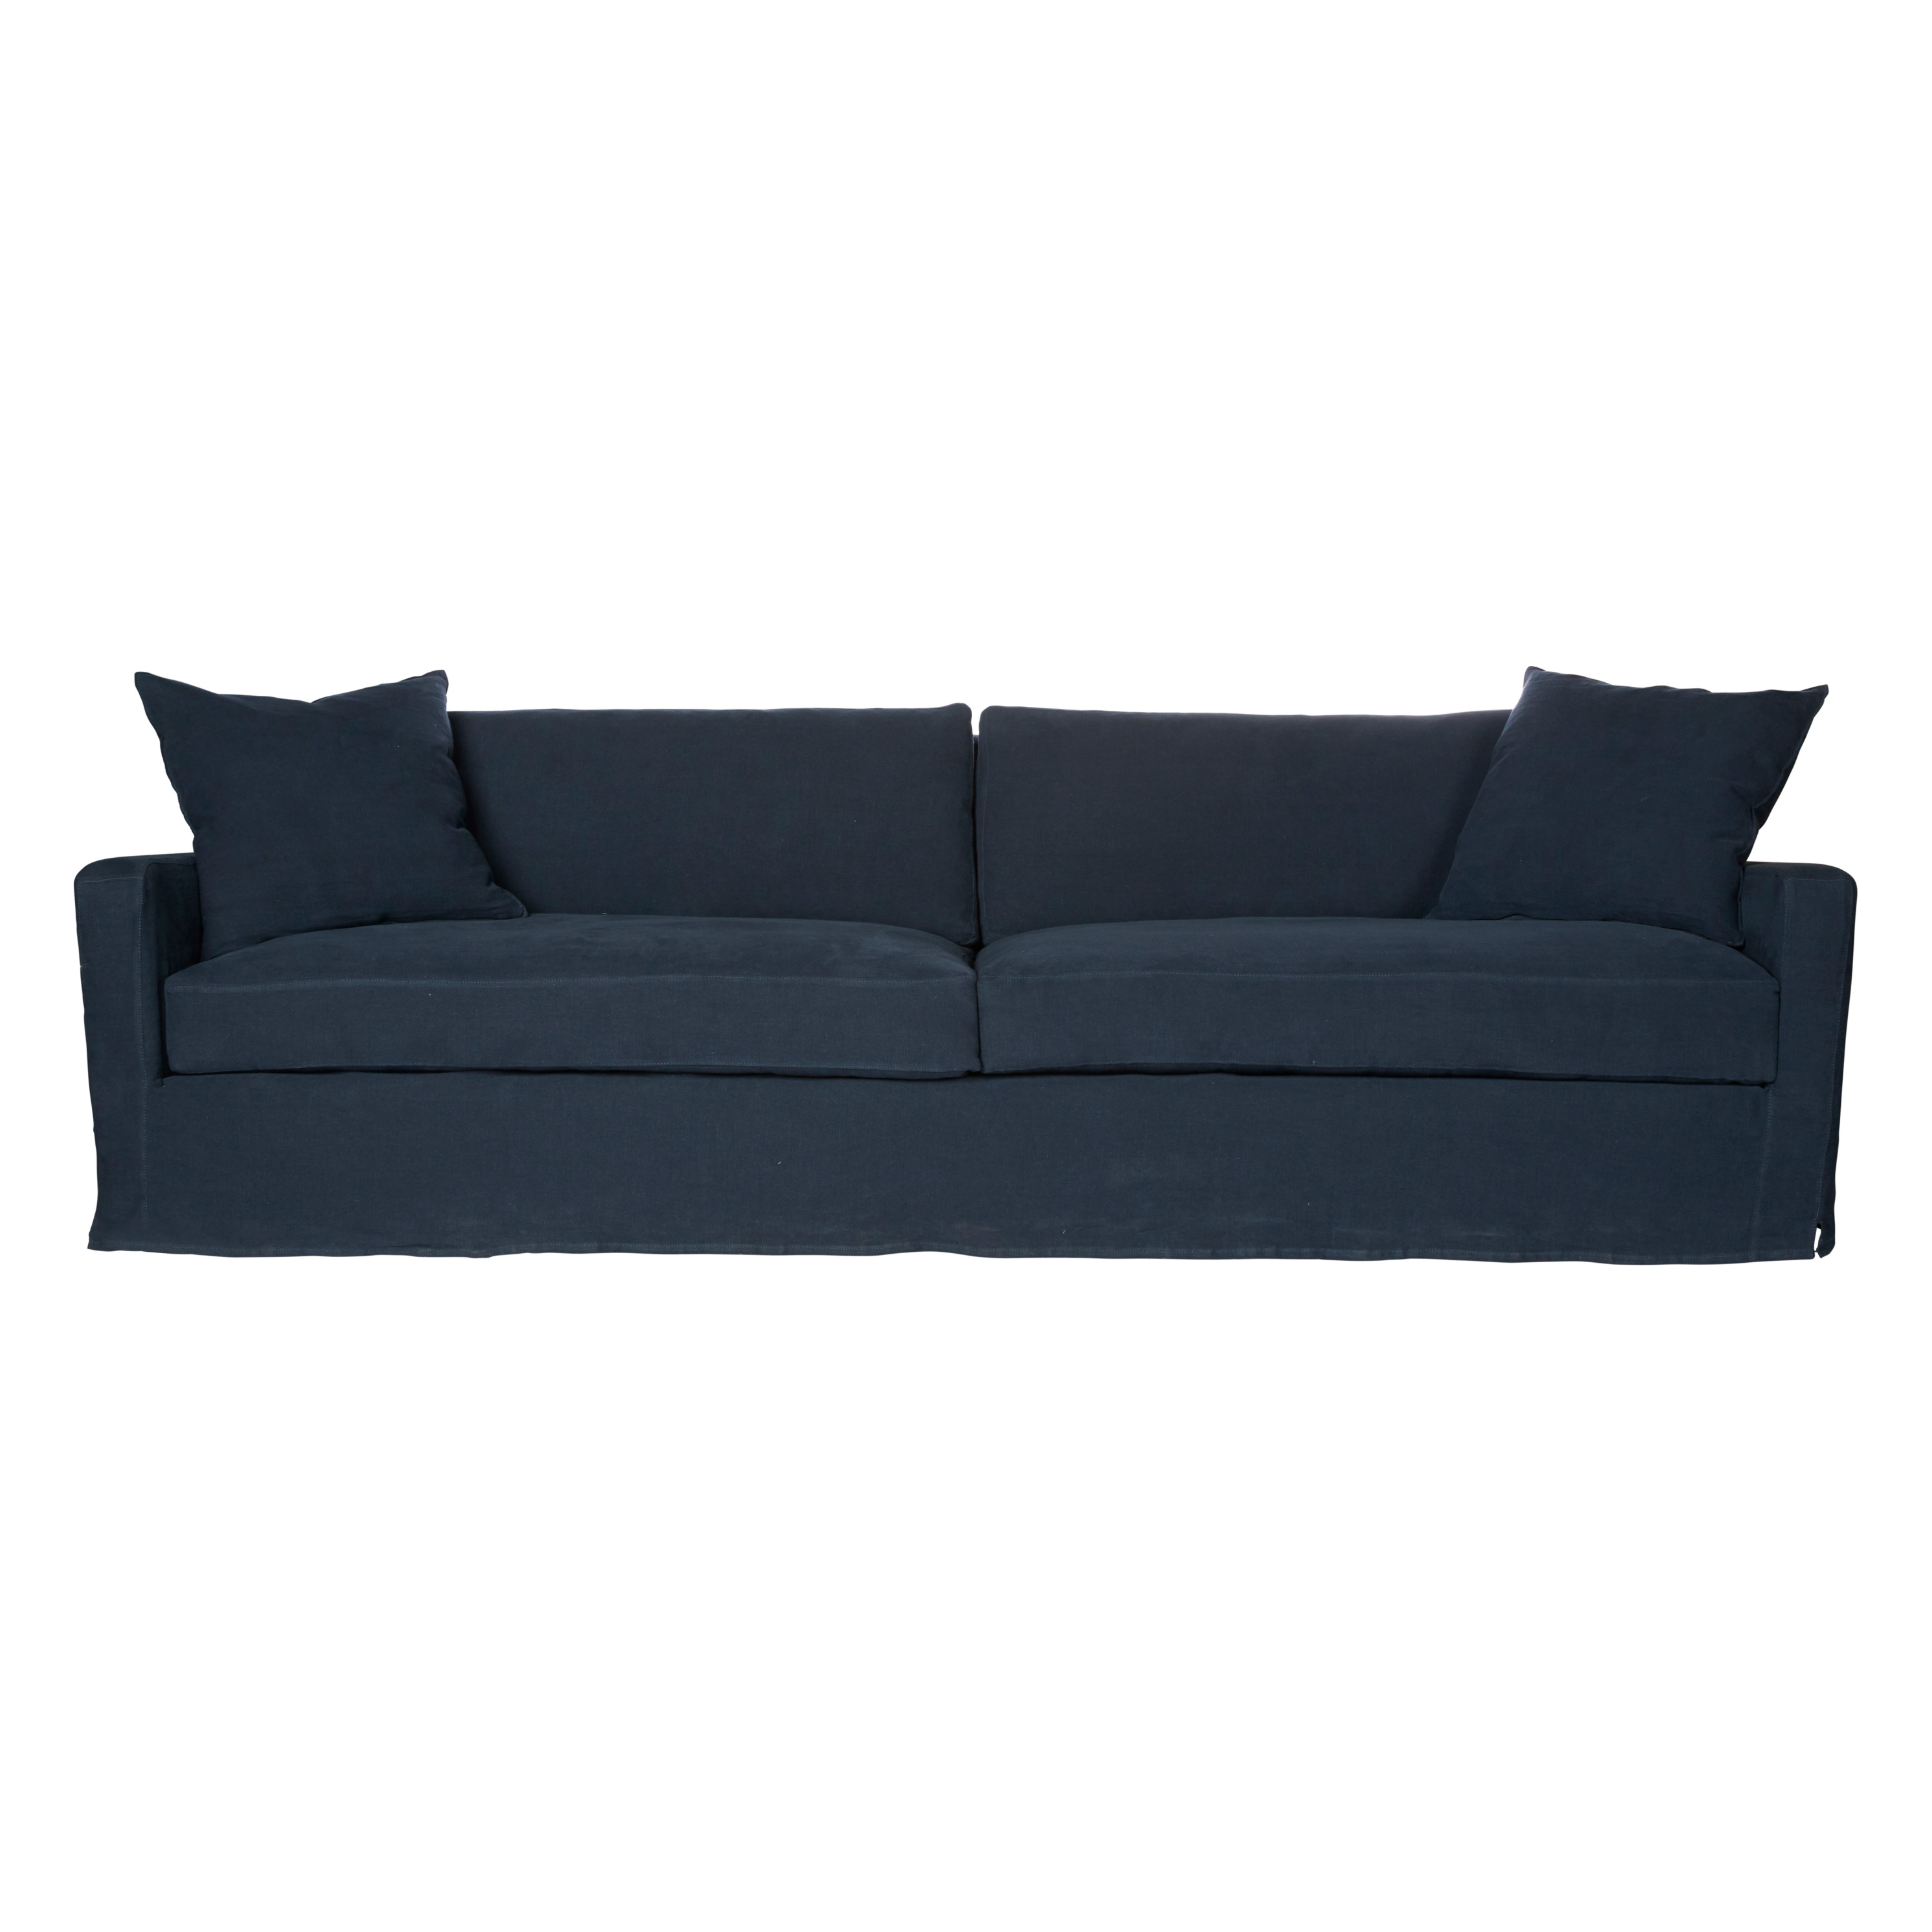 TV-binging nights are alright with the sunset sofa.  It's an extra deep sofa with a subtly reclined back.  It works well in rooms with mounted tvs or sunrooms.  Enjoy this sofa slipcovered or upholstered.  Photographed in Mariet Marine 100% linen.  108"w x 41"d x 30"h Seat Space: 96"w x 24"d x 19"h